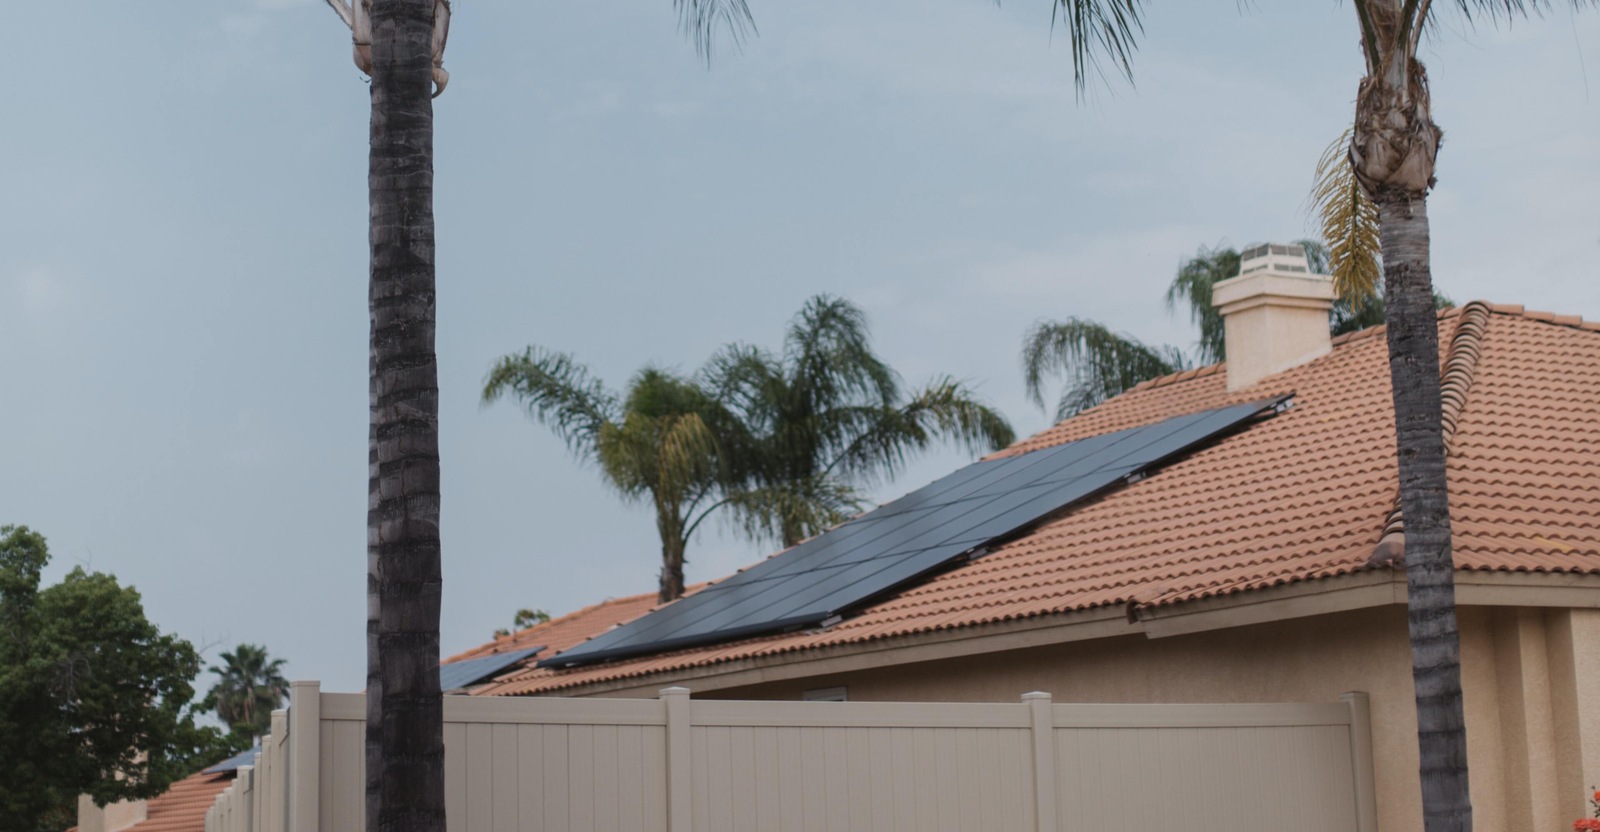 solar panels on roof in between palm trees in california (1)